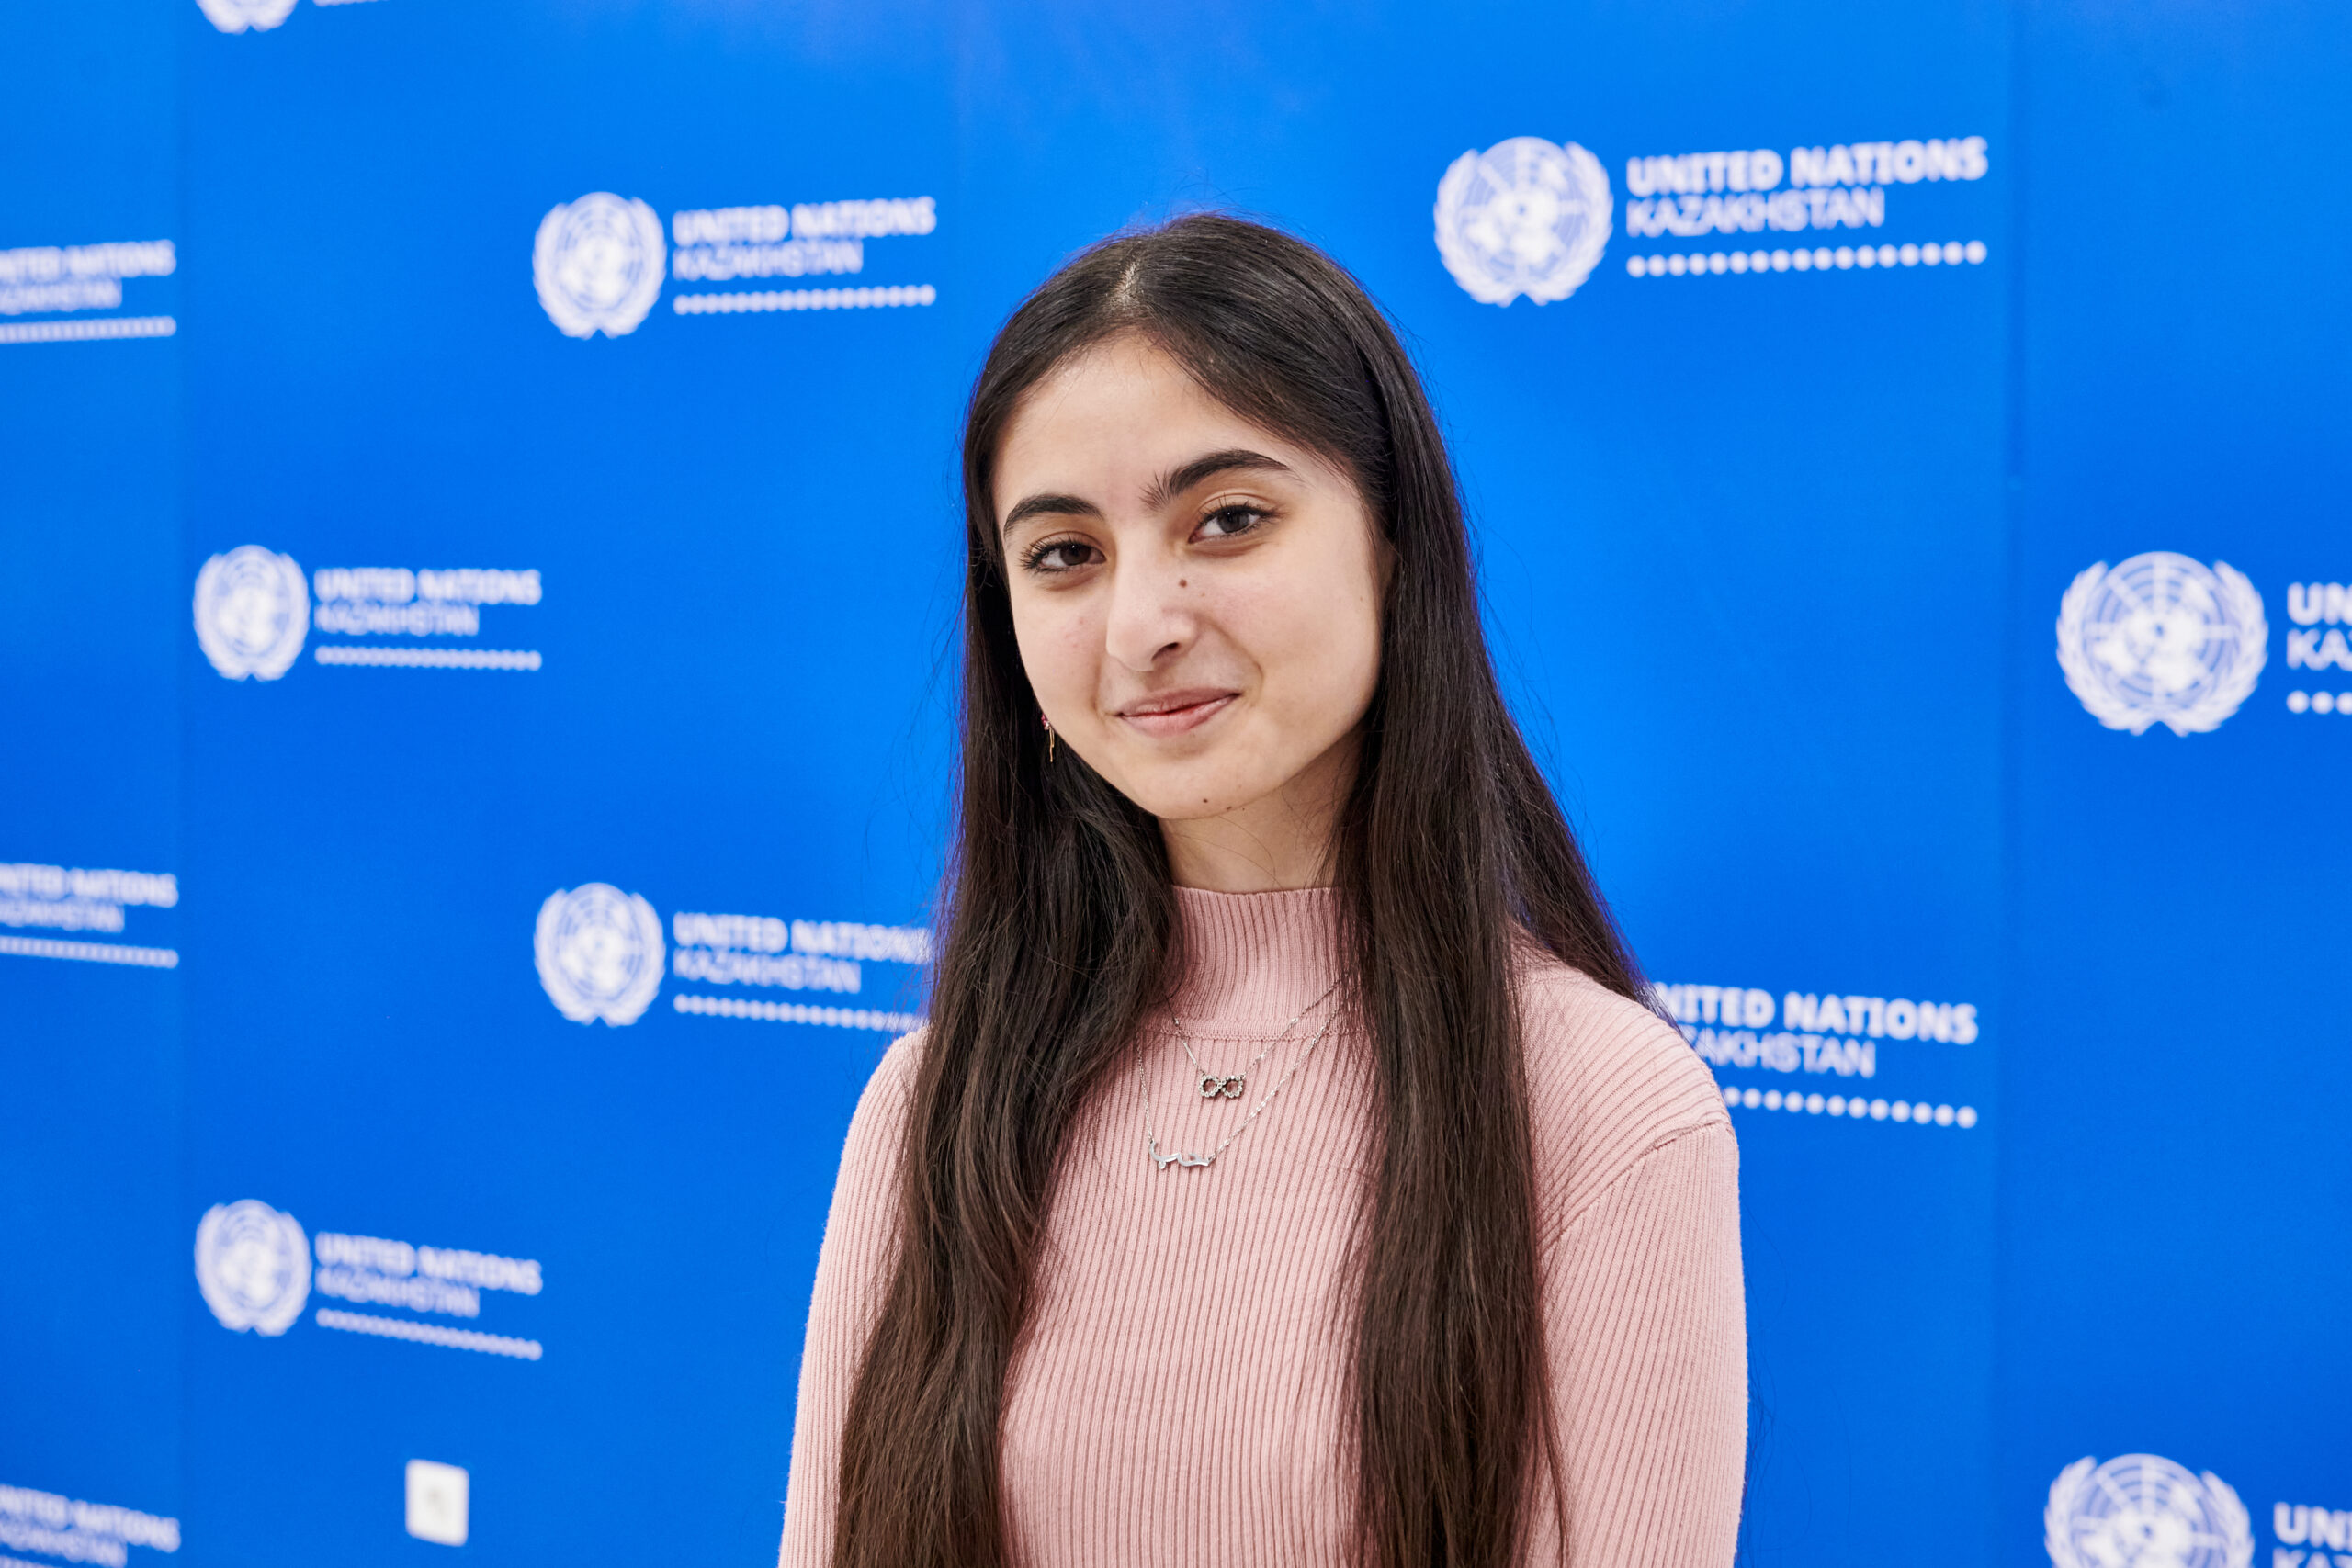 Tabasum, a 20-year-old Afghan refugee student at Kazakh-Russian Medical University in Almaty, wishes to become a doctor since childhood.